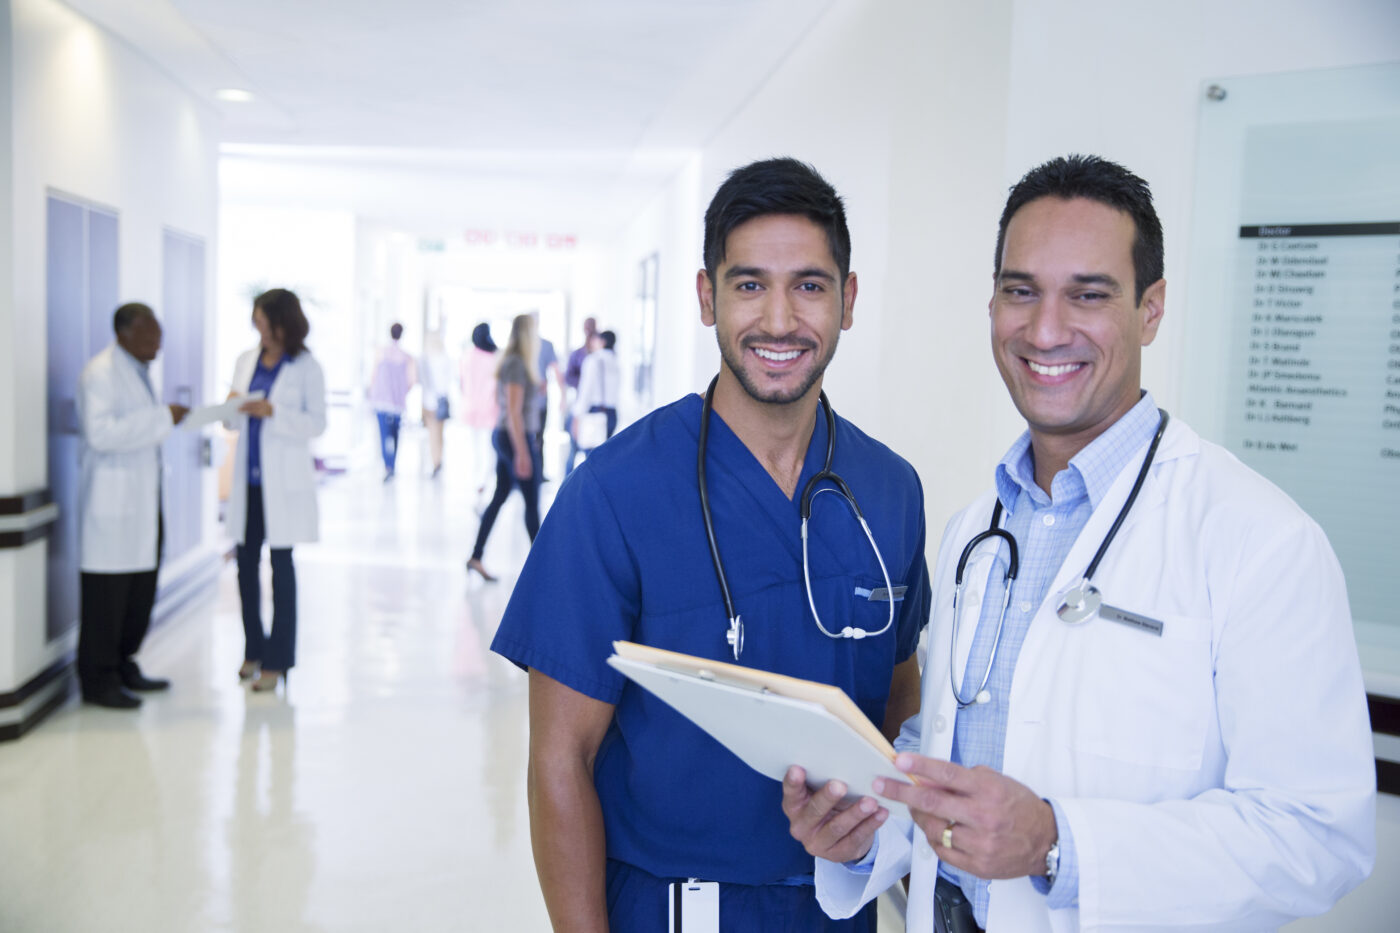 How Much Do Resident Doctors Make in 2022?